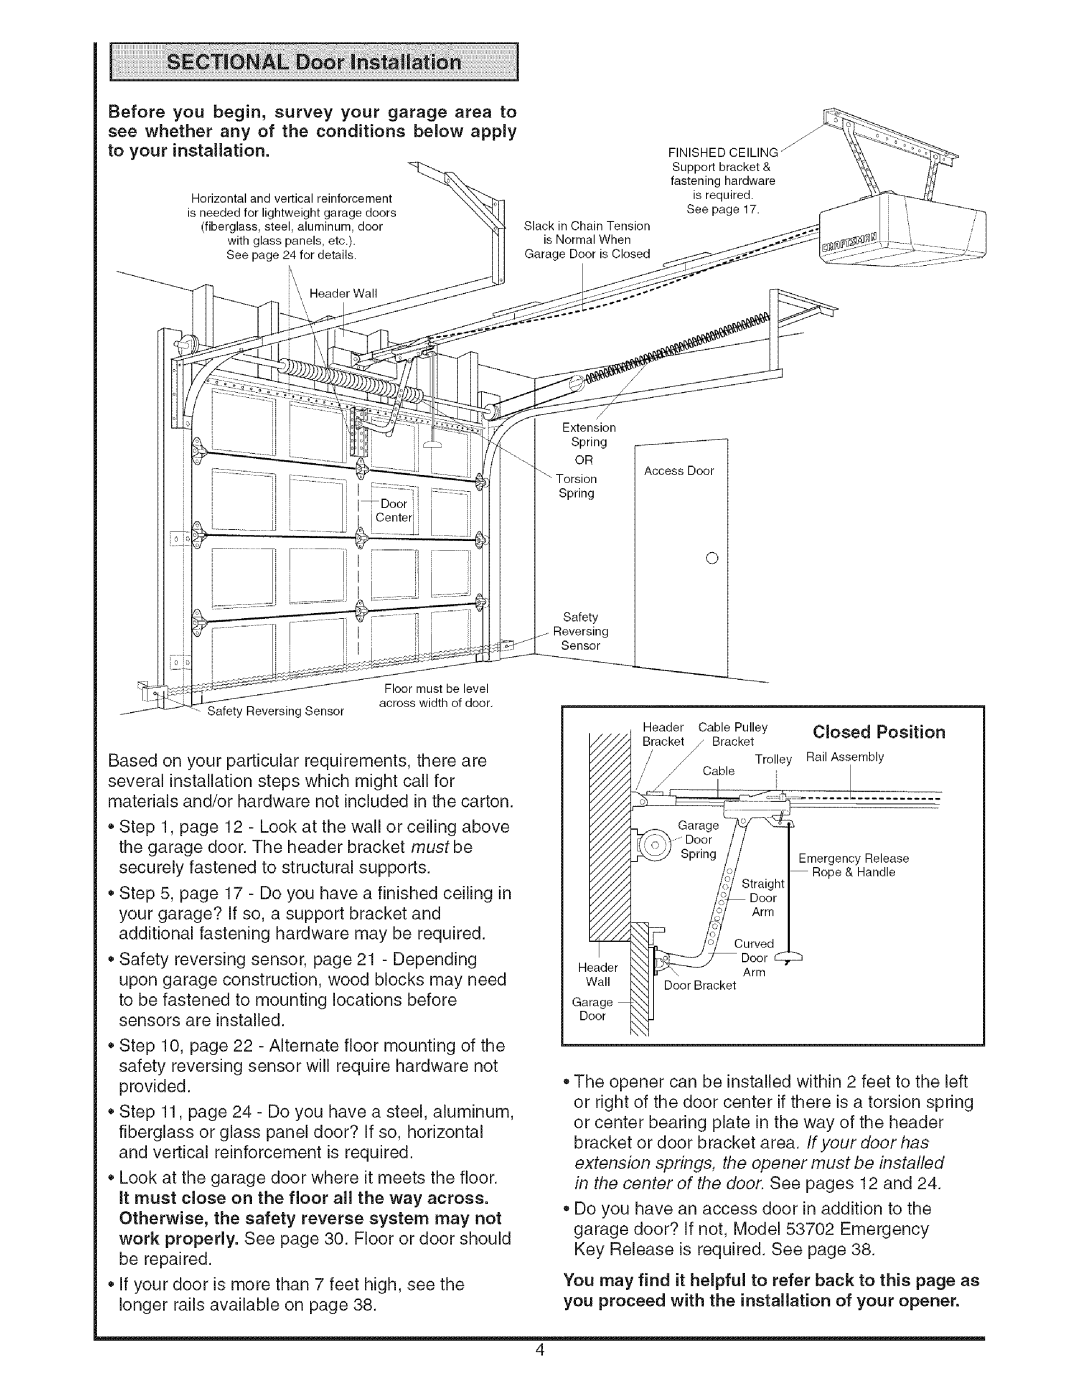 Sears 139.53535SRT1 operating instructions Doord, Cosed Position, in the center of the door. See pages 12 and 